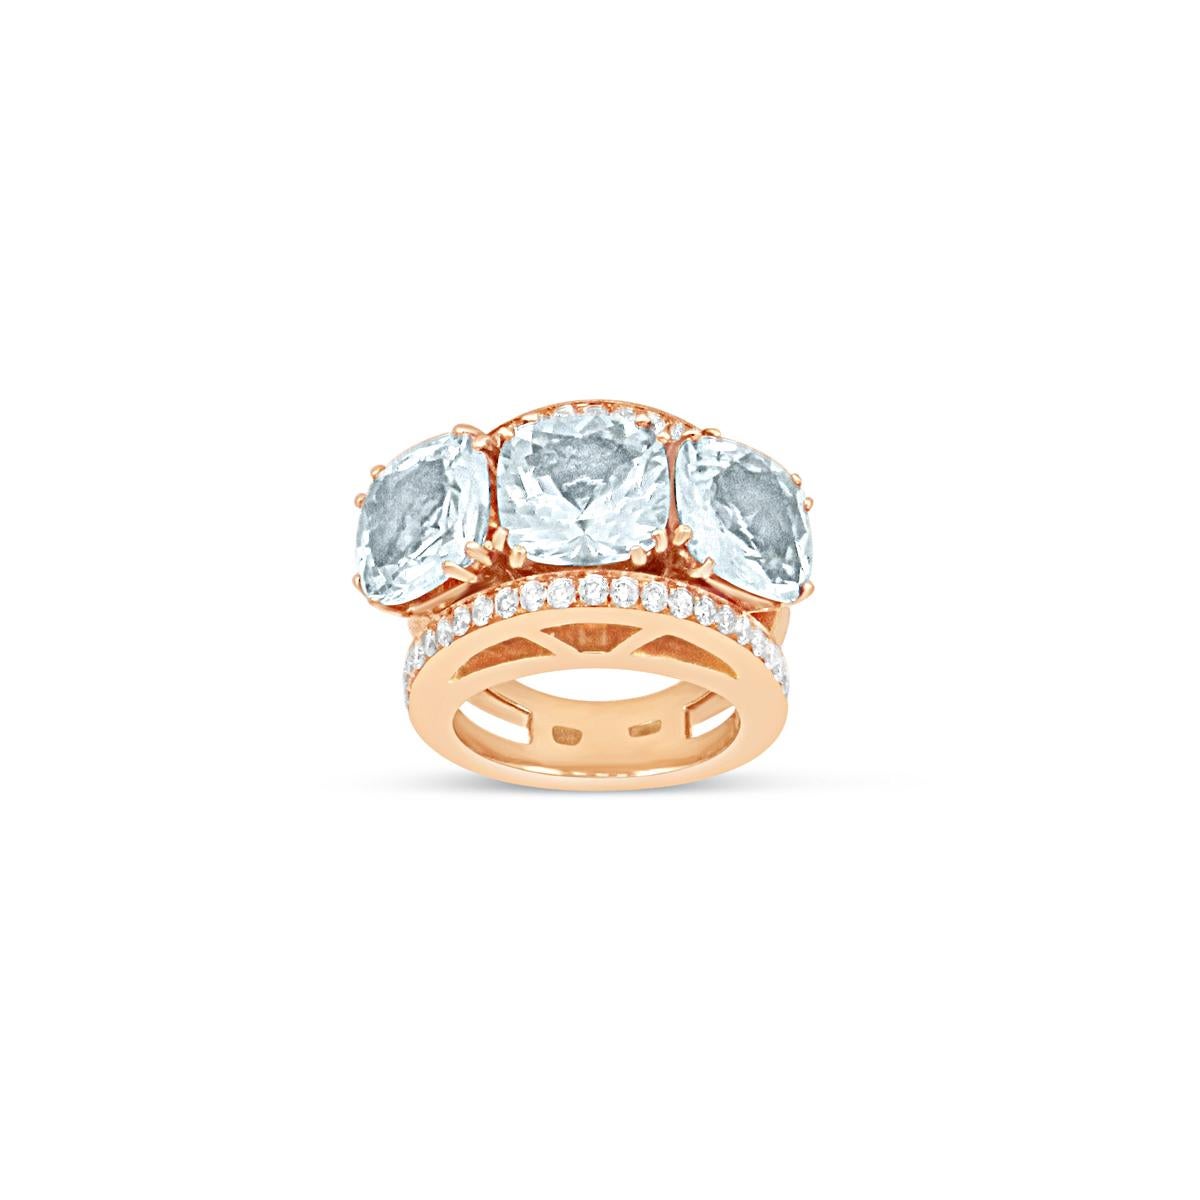 This talented Italian designer recreated the iconic trilogy ring with a contemporary spin. Featuring three sizable aquamarine stones (9.93 ct), this elegant ring radiates light blue hues from all angles.
Aquamarine is a beautiful gemstone that has